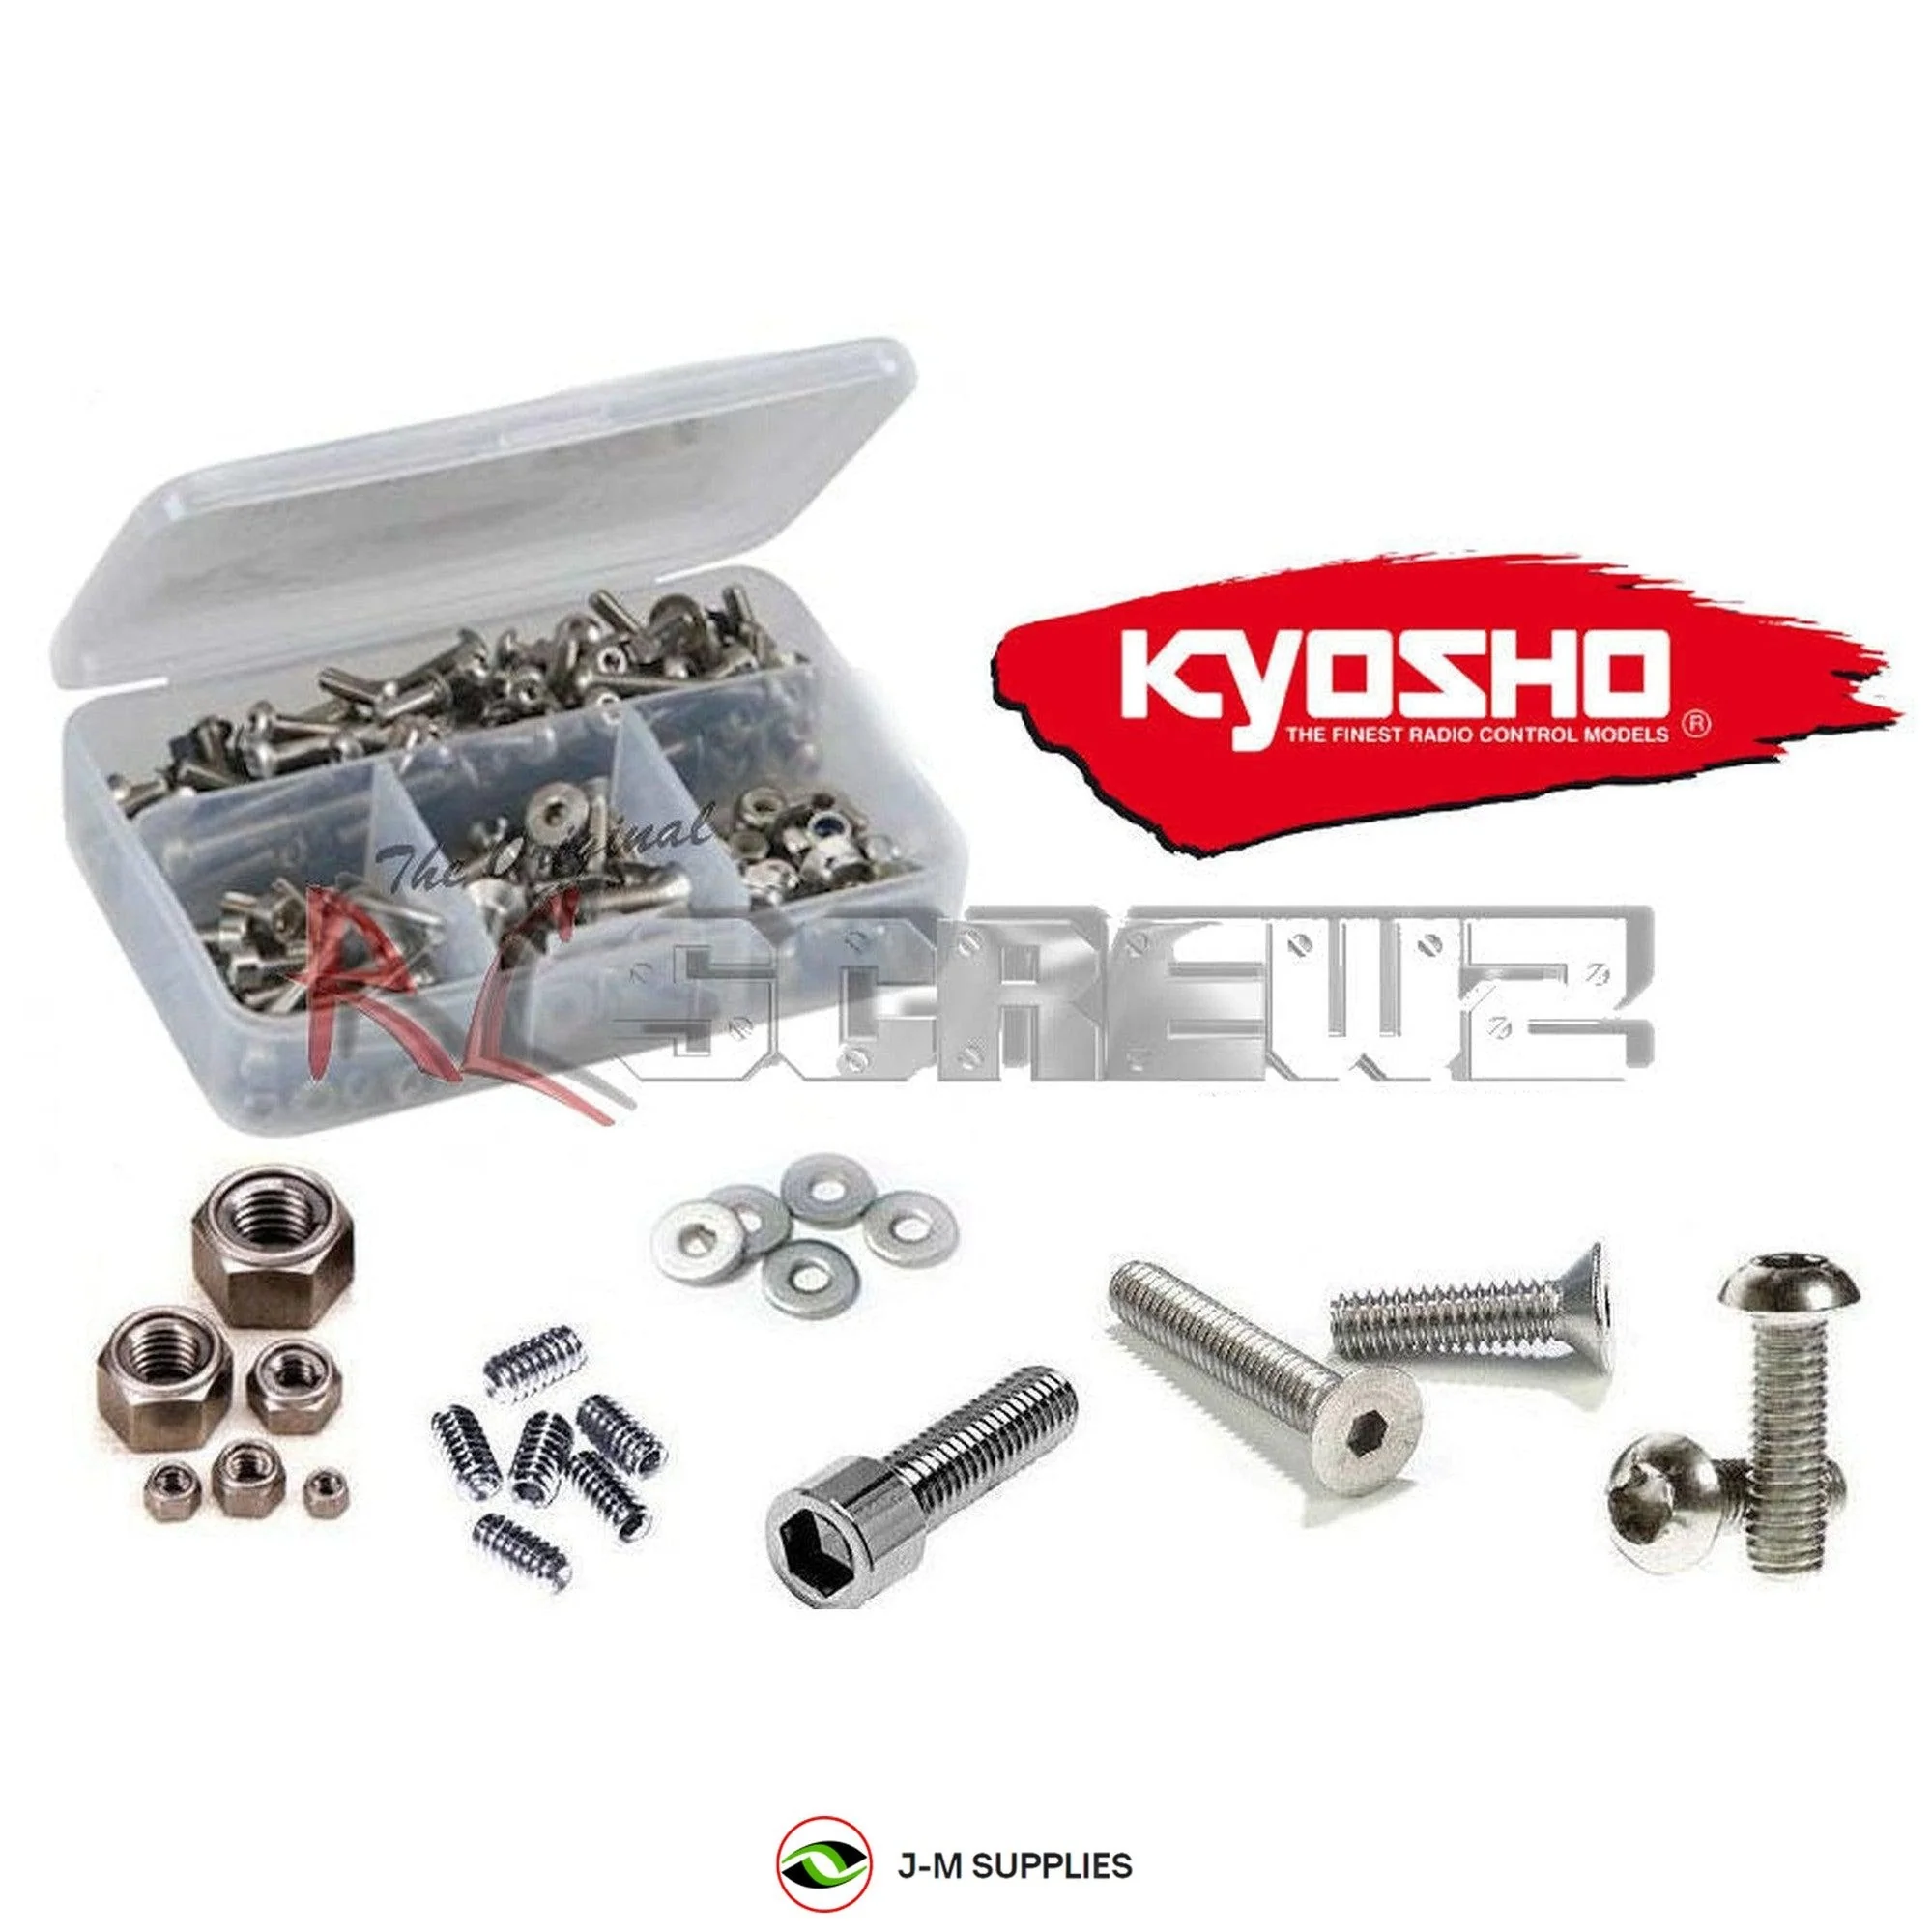 RCScrewZ Stainless Steel Screw Kit kyo033 for Kyosho Progress 4WDS #3067 - Picture 1 of 12